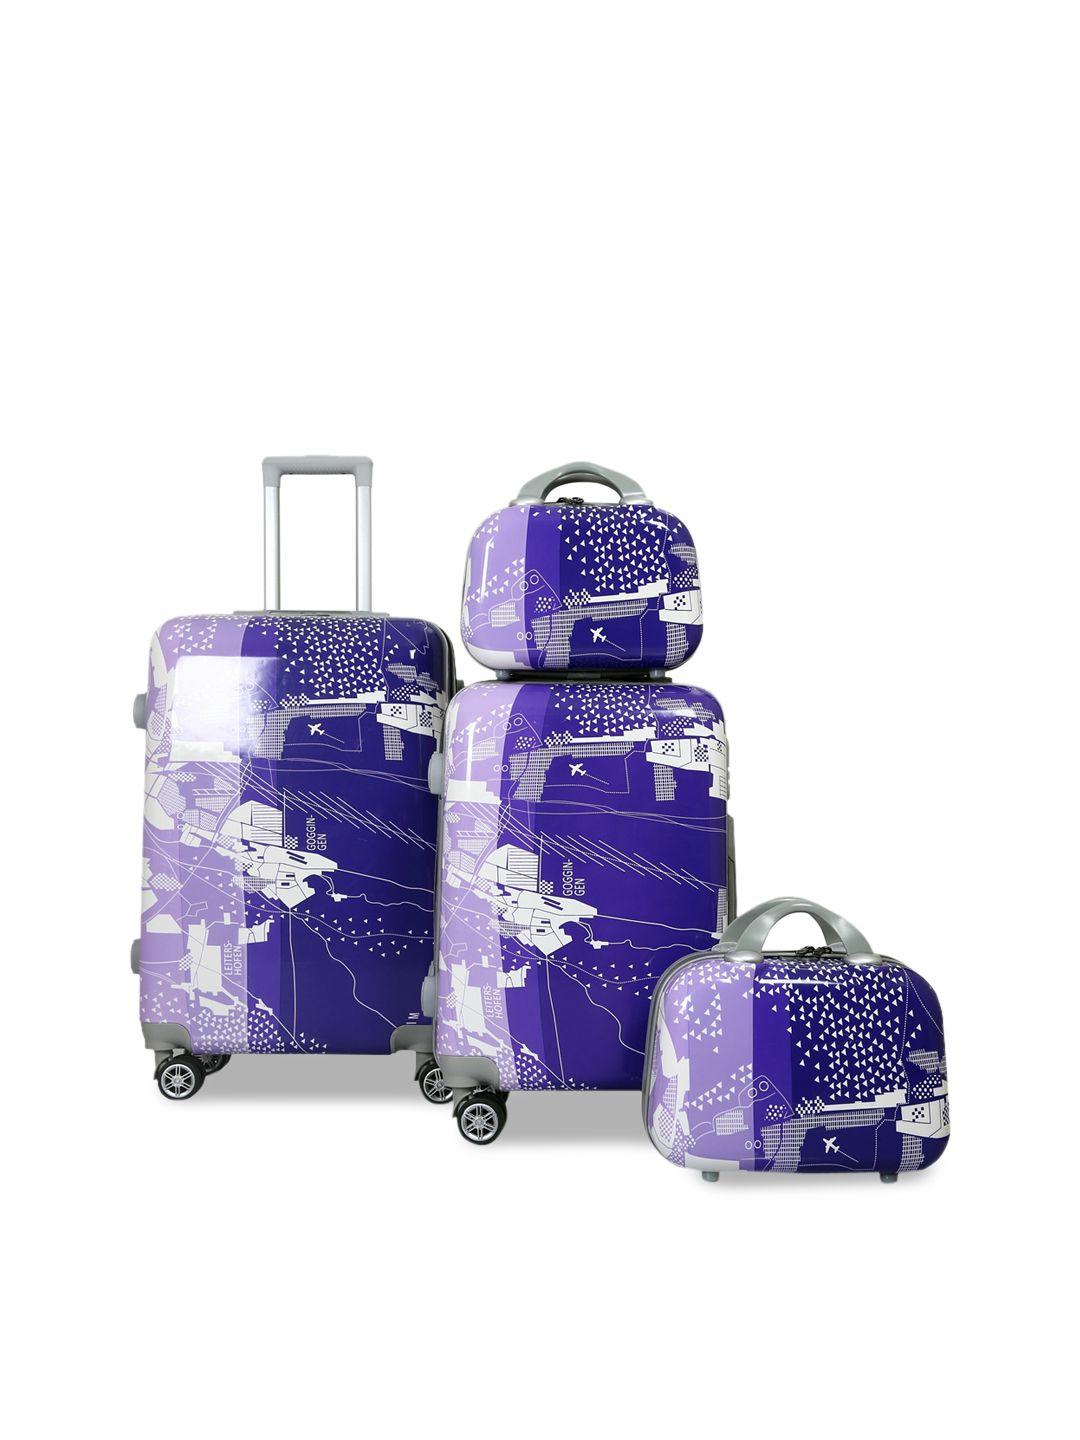 polo class set of 4 printed hard case luggage trolley & vanity bag